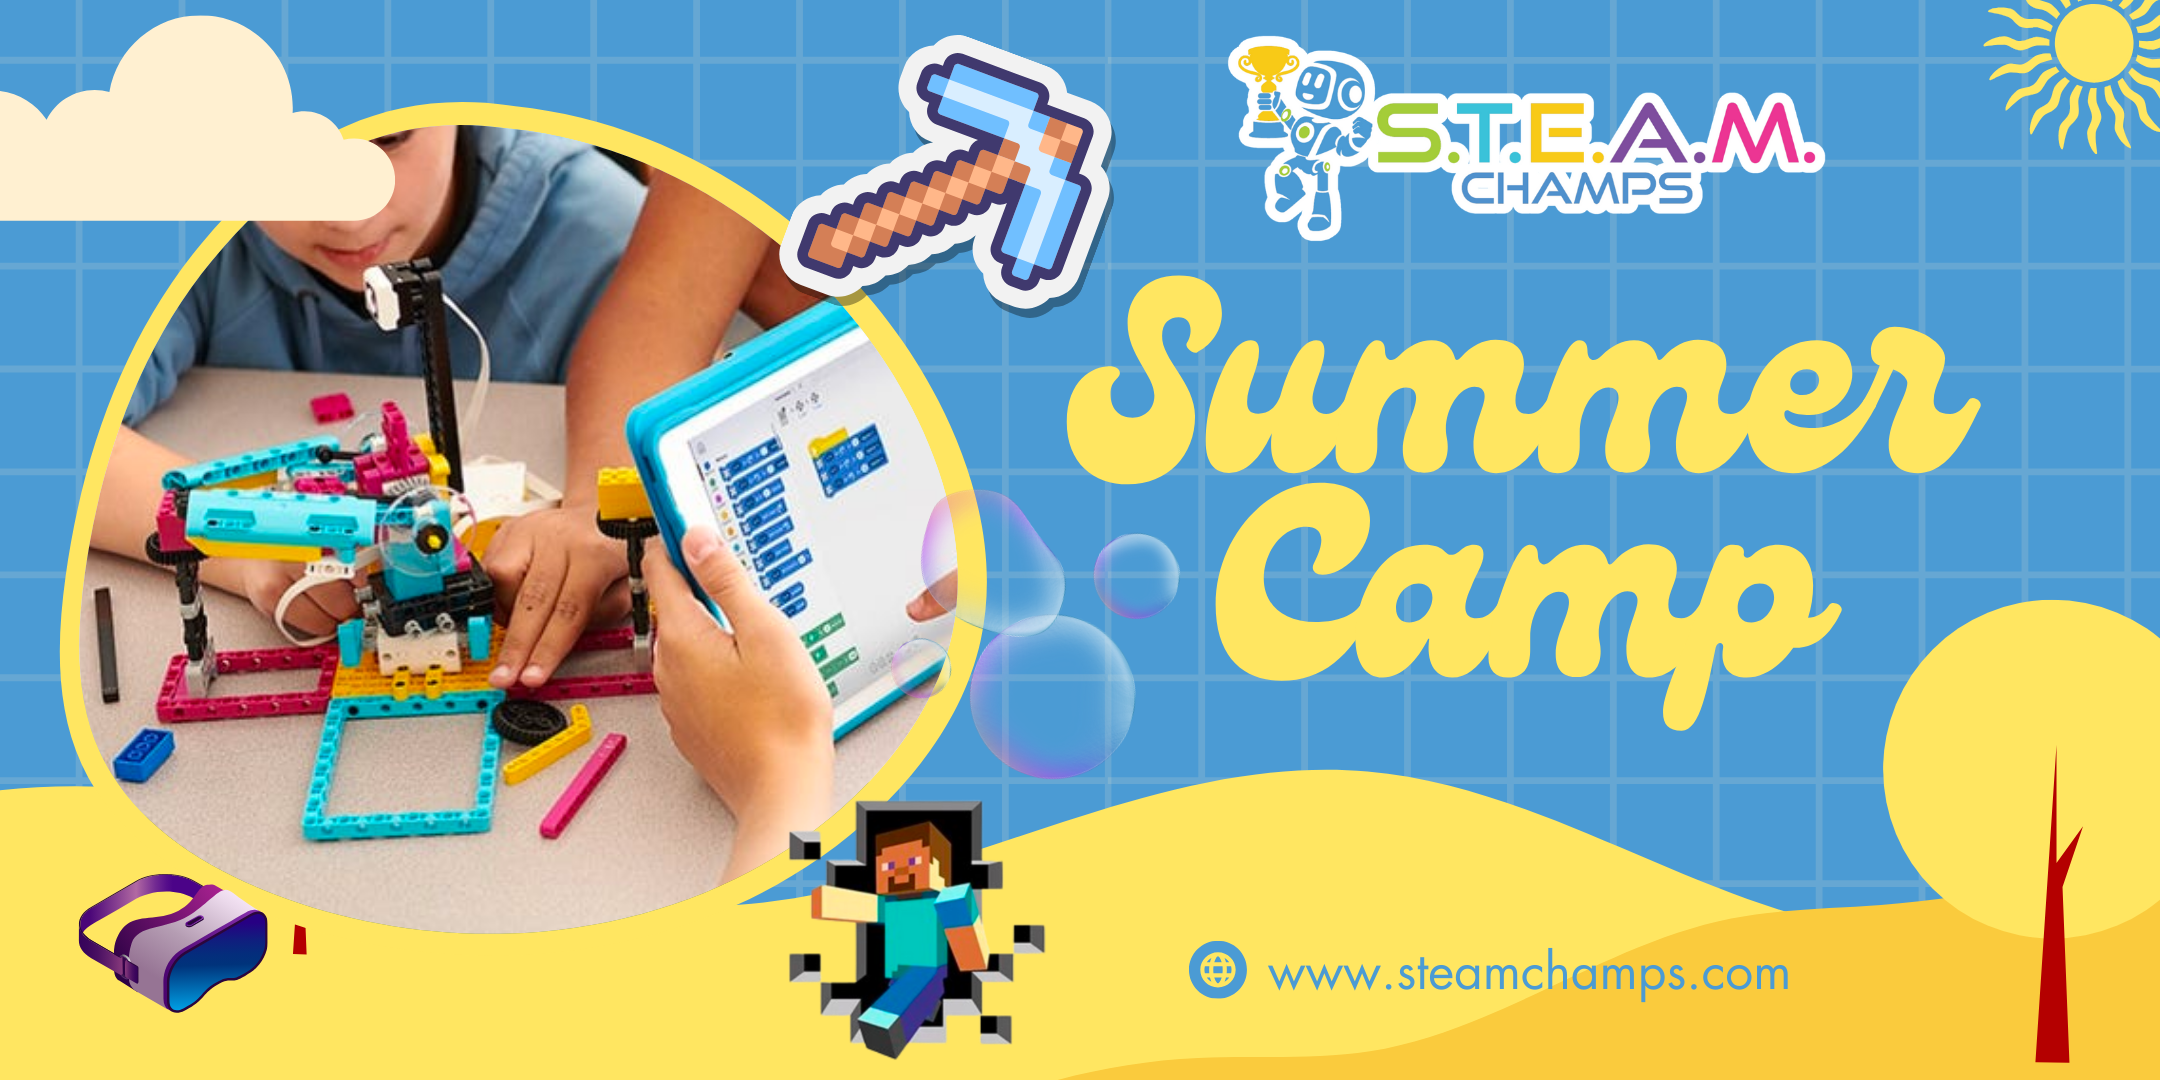 STEAM Champs Summer Camp – Minecraft Coding, 3D Printing, Outdoors&Drones